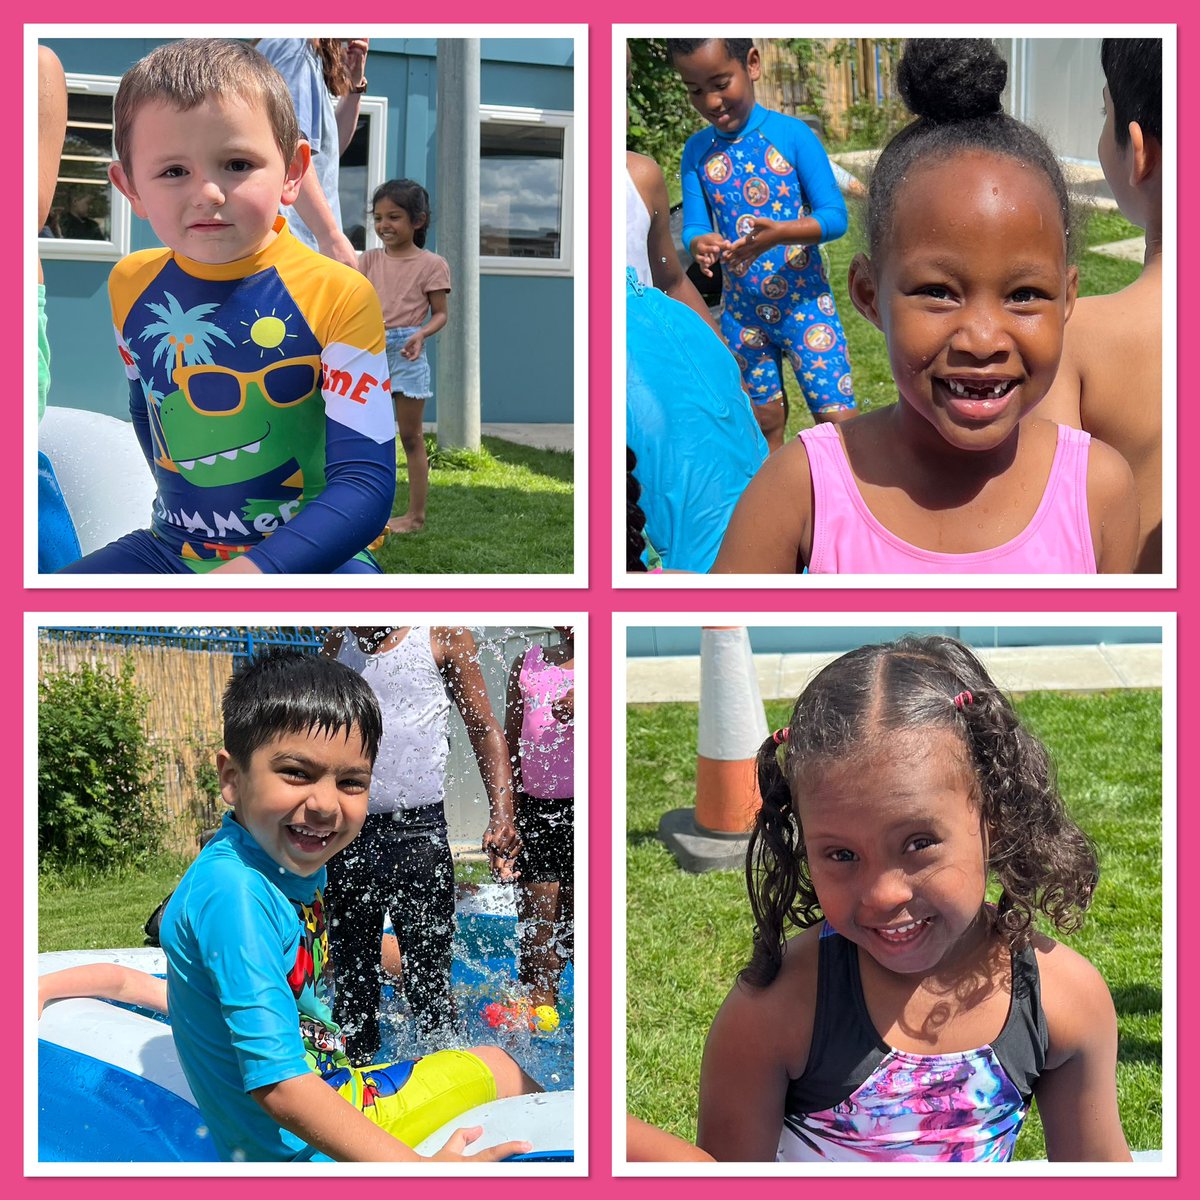 These are the smiles of joy you get when the pool comes out for splash time! Bumble Bees had a great time splashing each other and all the staff this afternoon for headteachers day ☀️ @RebeccaolleyTVI @TVInfants @AdamDobsonTVI